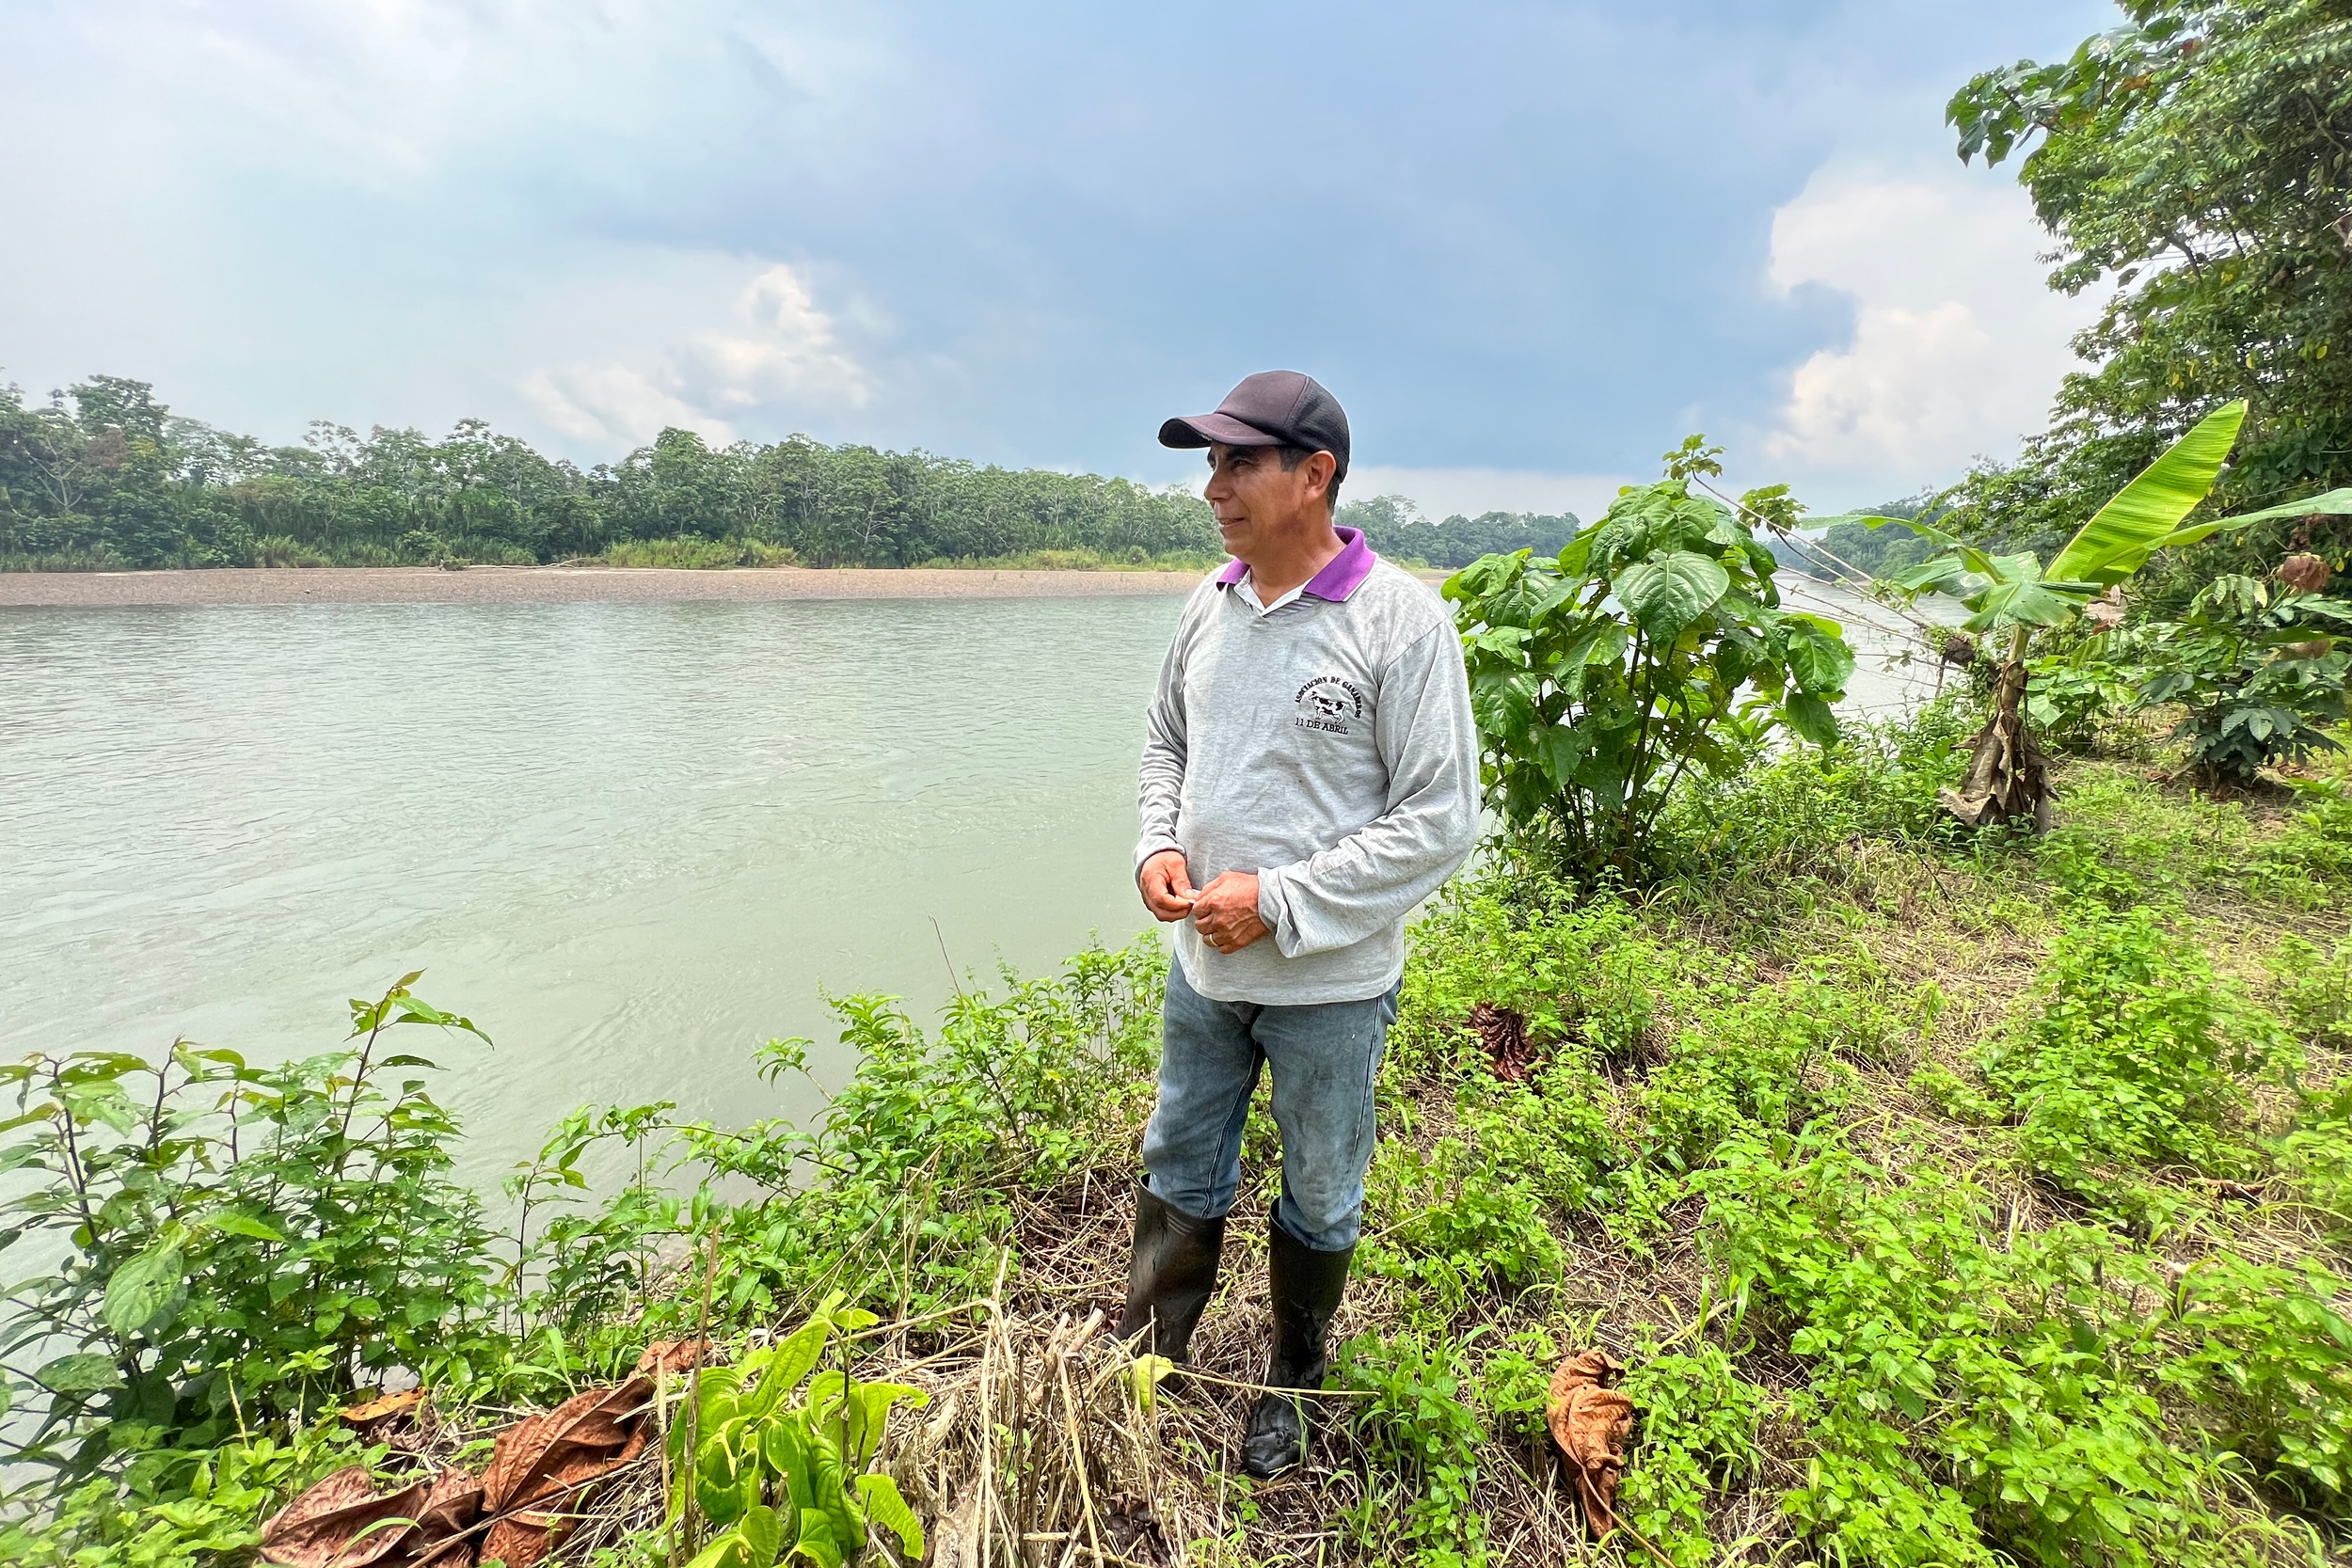 Celso Mora stands on his property adjacent to the Napo River on March 21, 2023. Mora, who is now in his early 60s, and his wife, Nancy, migrated to the Ecuadorian Amazon region with hopes of operating their own farm and raising a family. Credit: Katie Surma/Inside Climate News